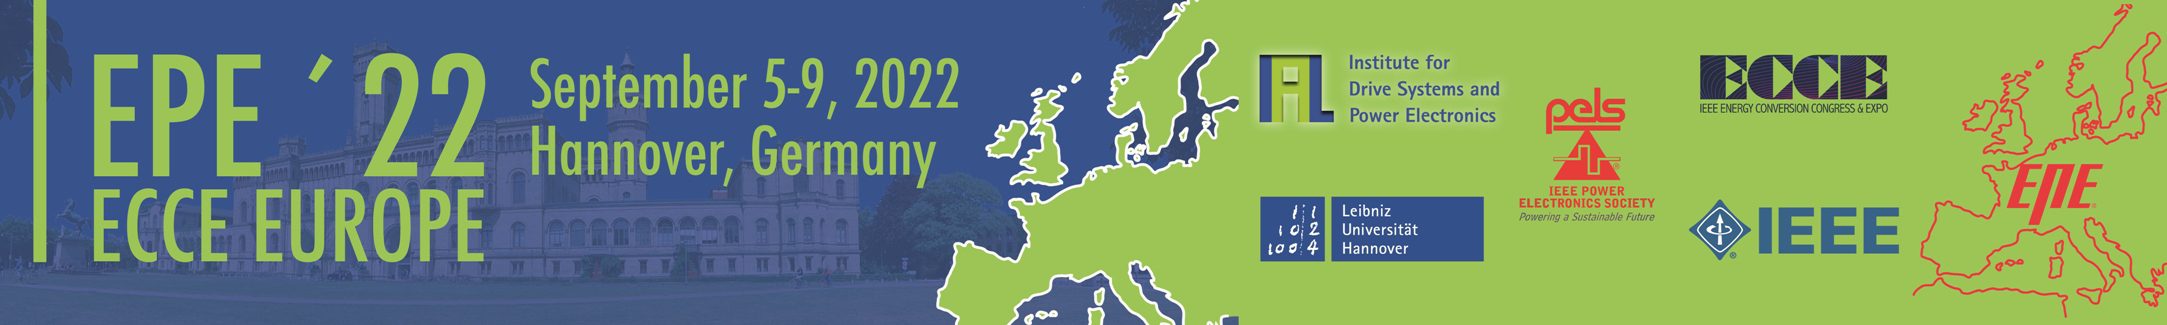 EPE'22 | 24th European Conference on Power Electronics and Applications